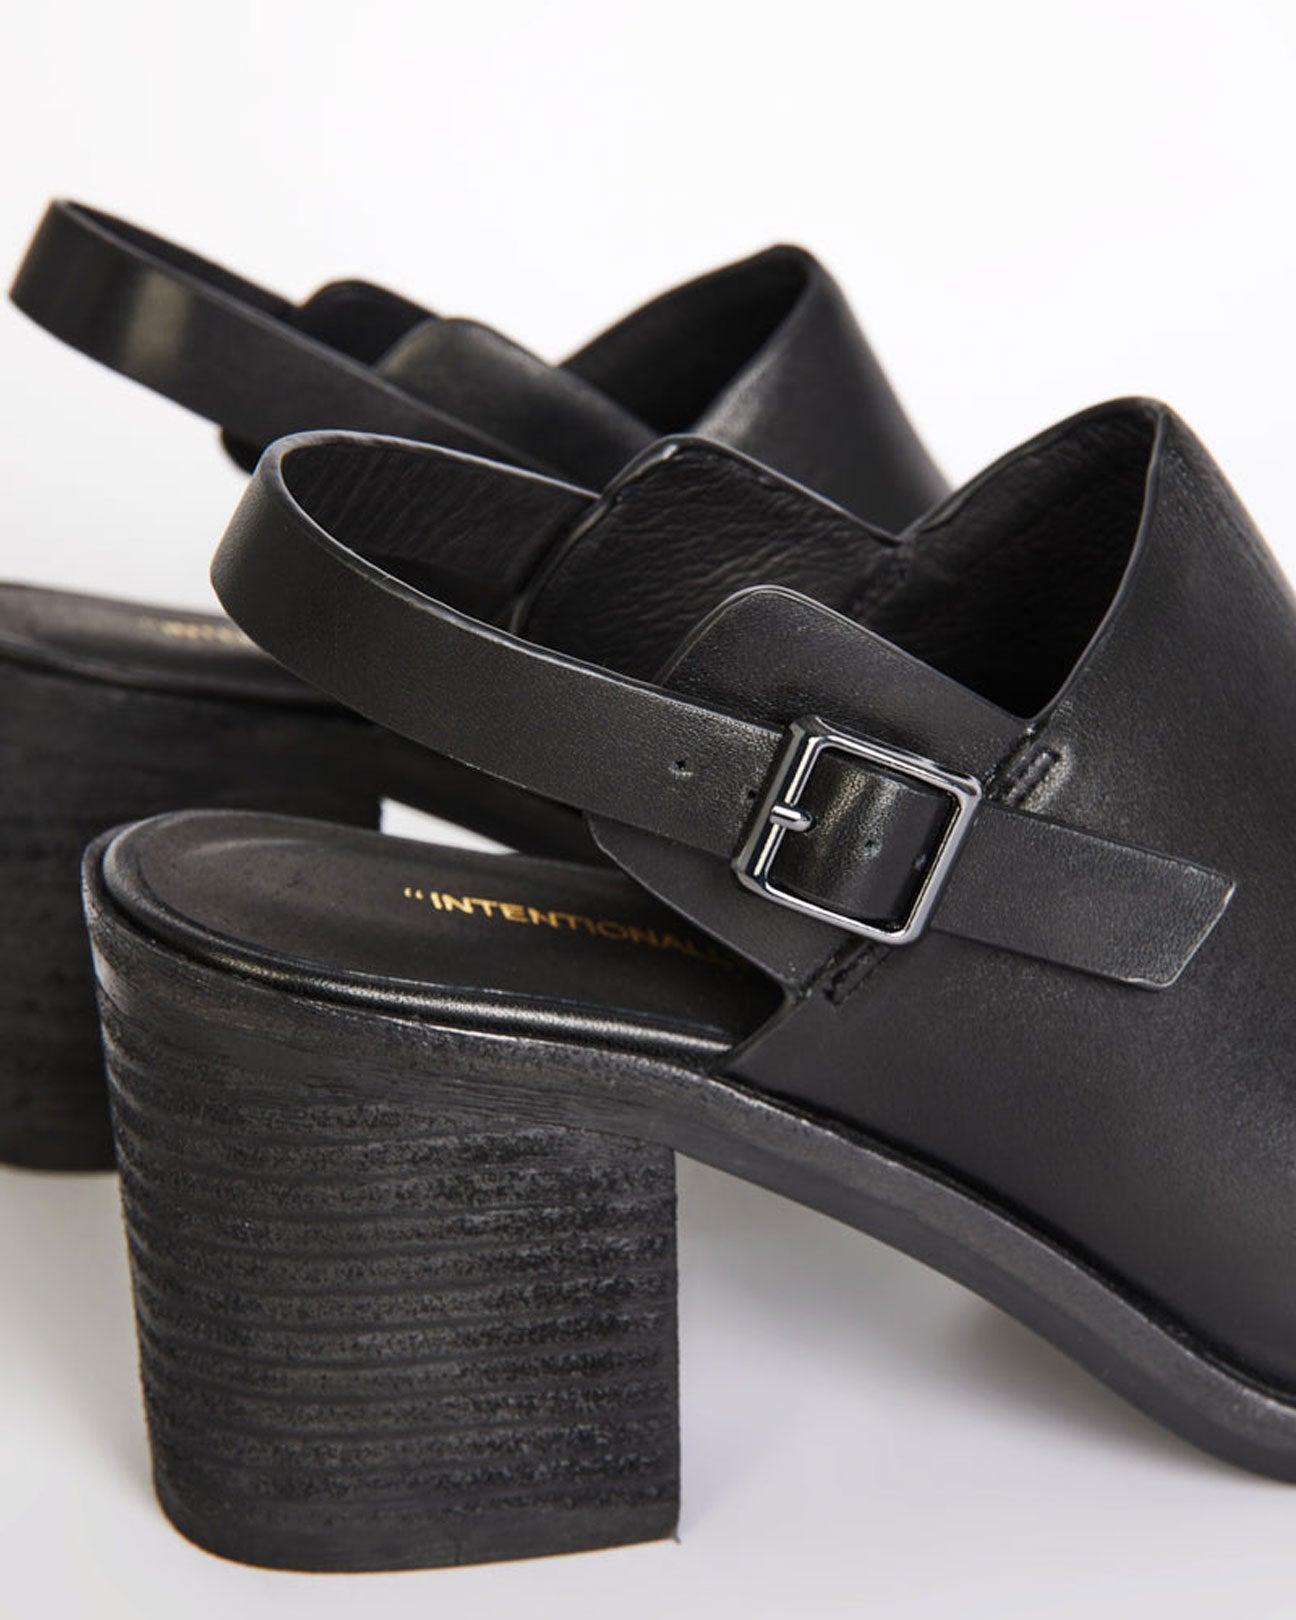 INTENTIONALLY BLANK Honcho Mule in Black available at Lahn.shop